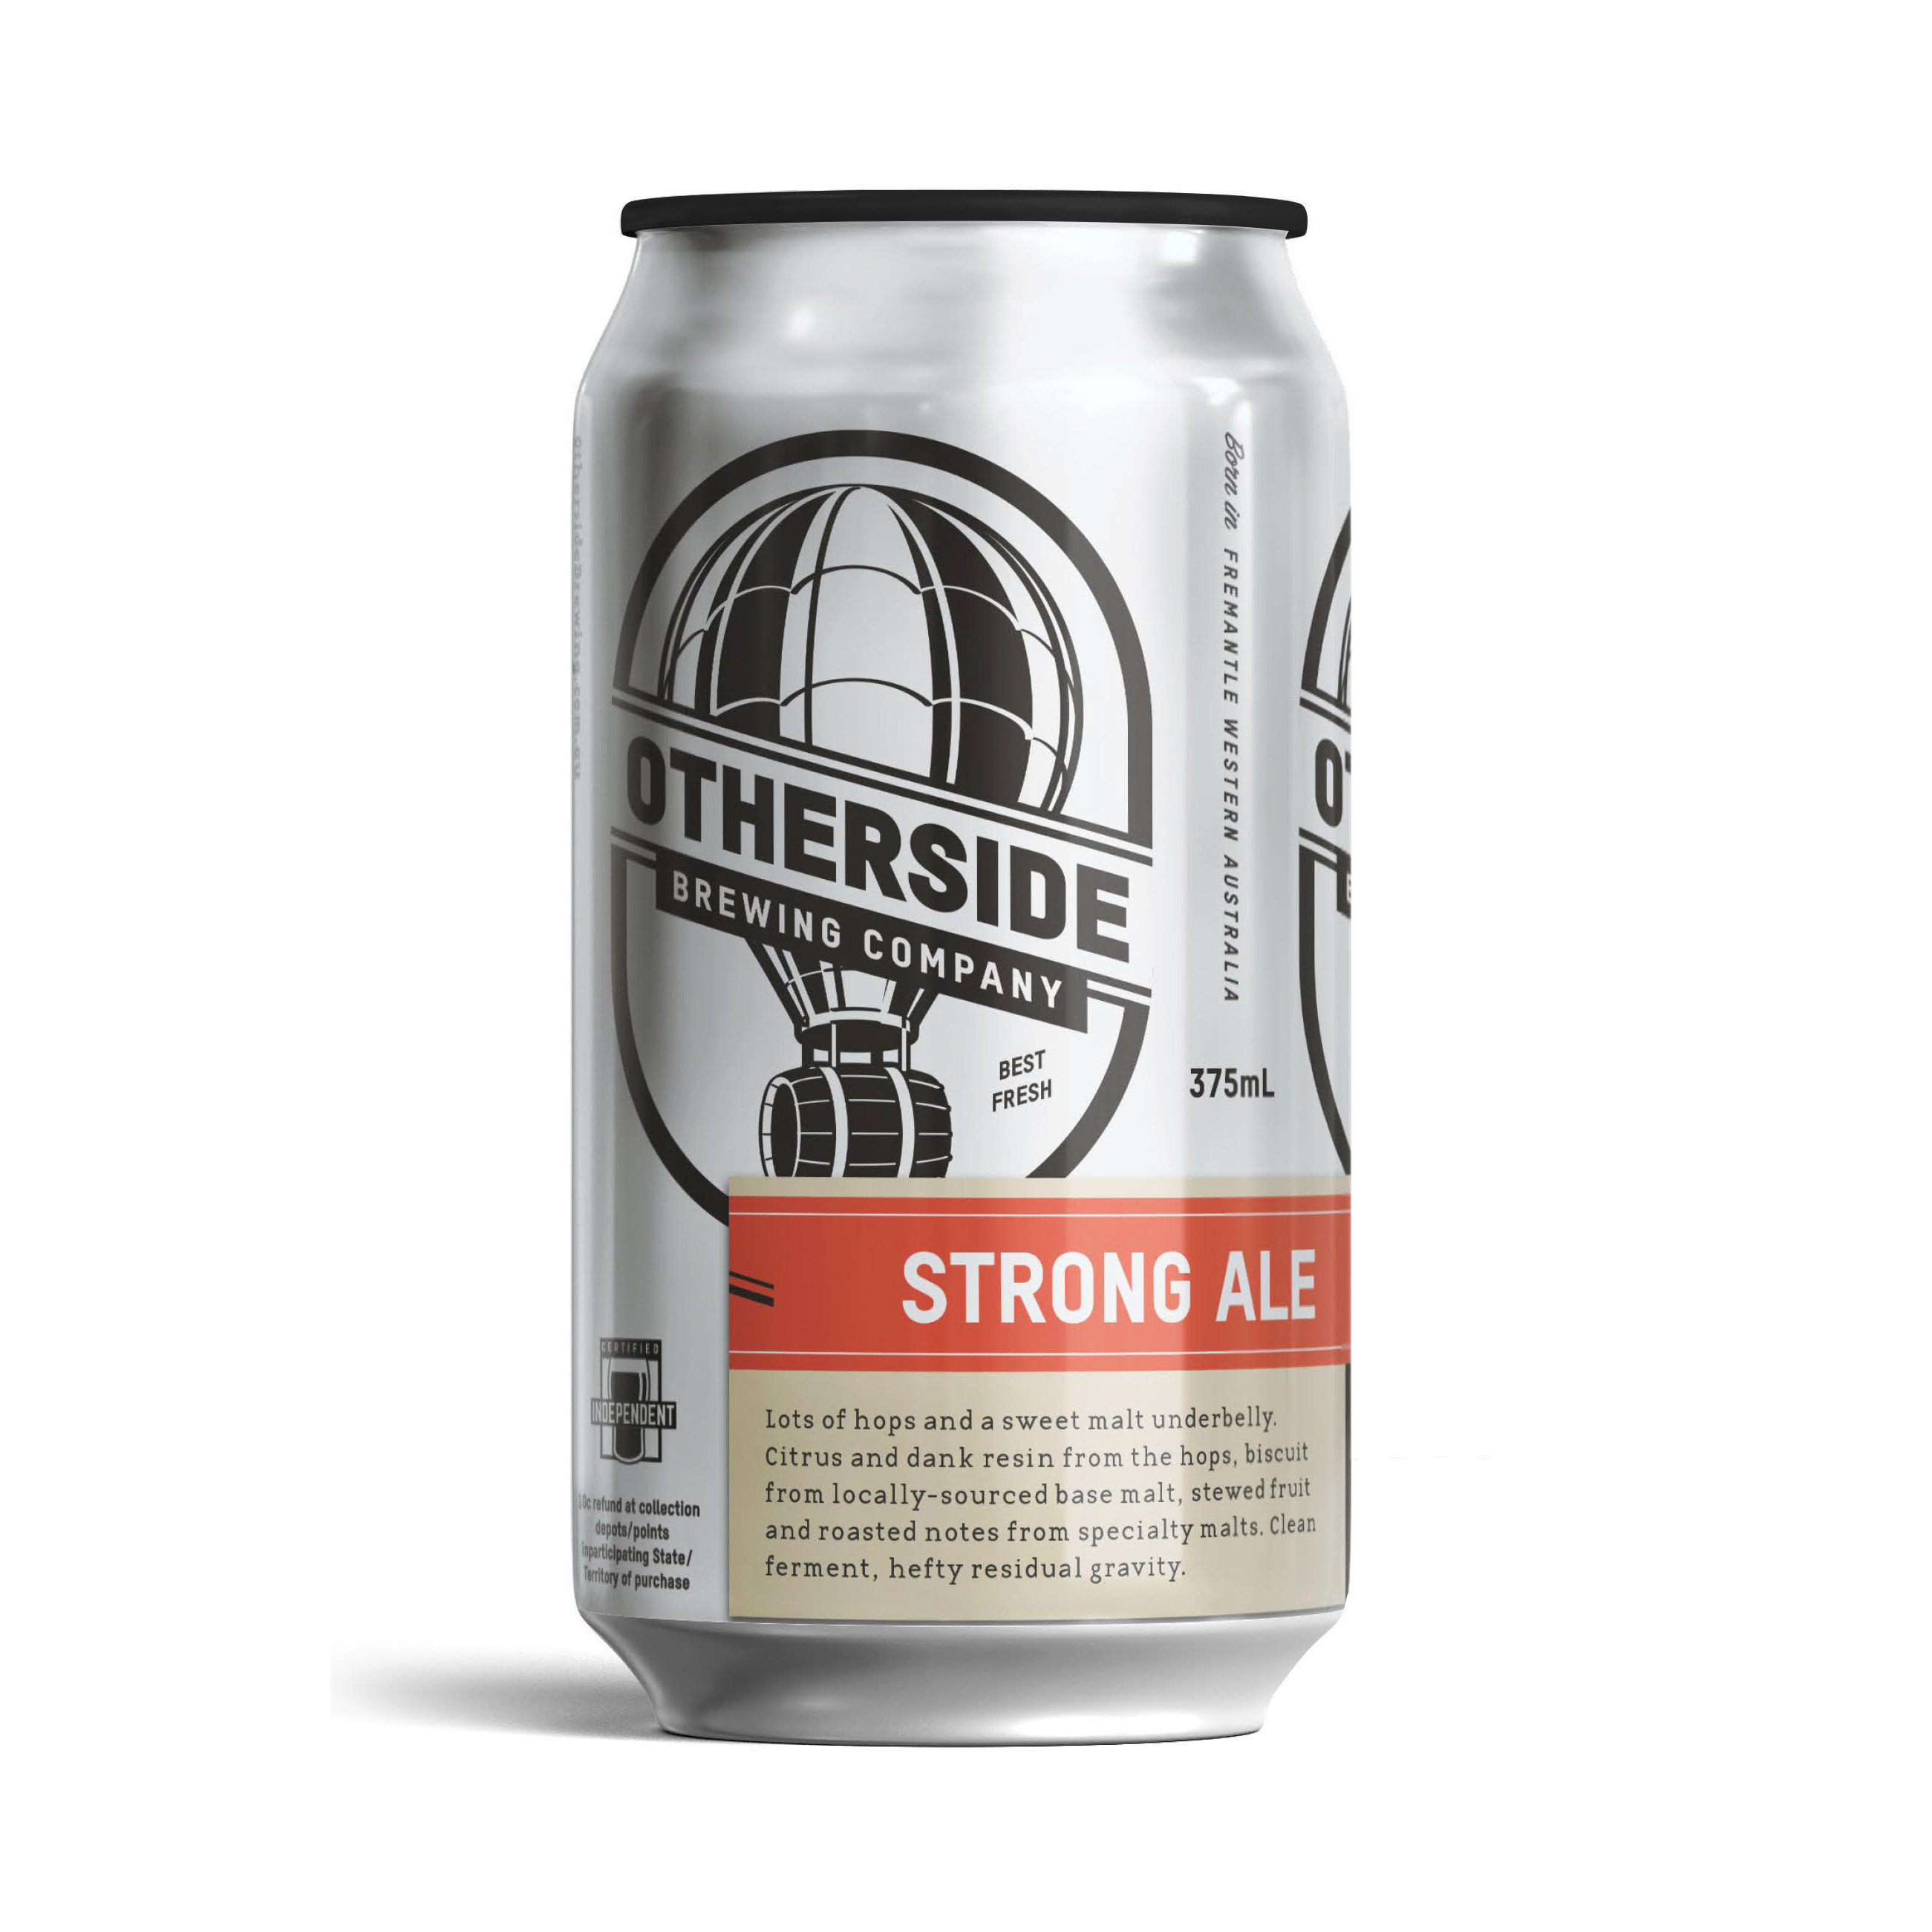 otherside-brewing-strong-ale